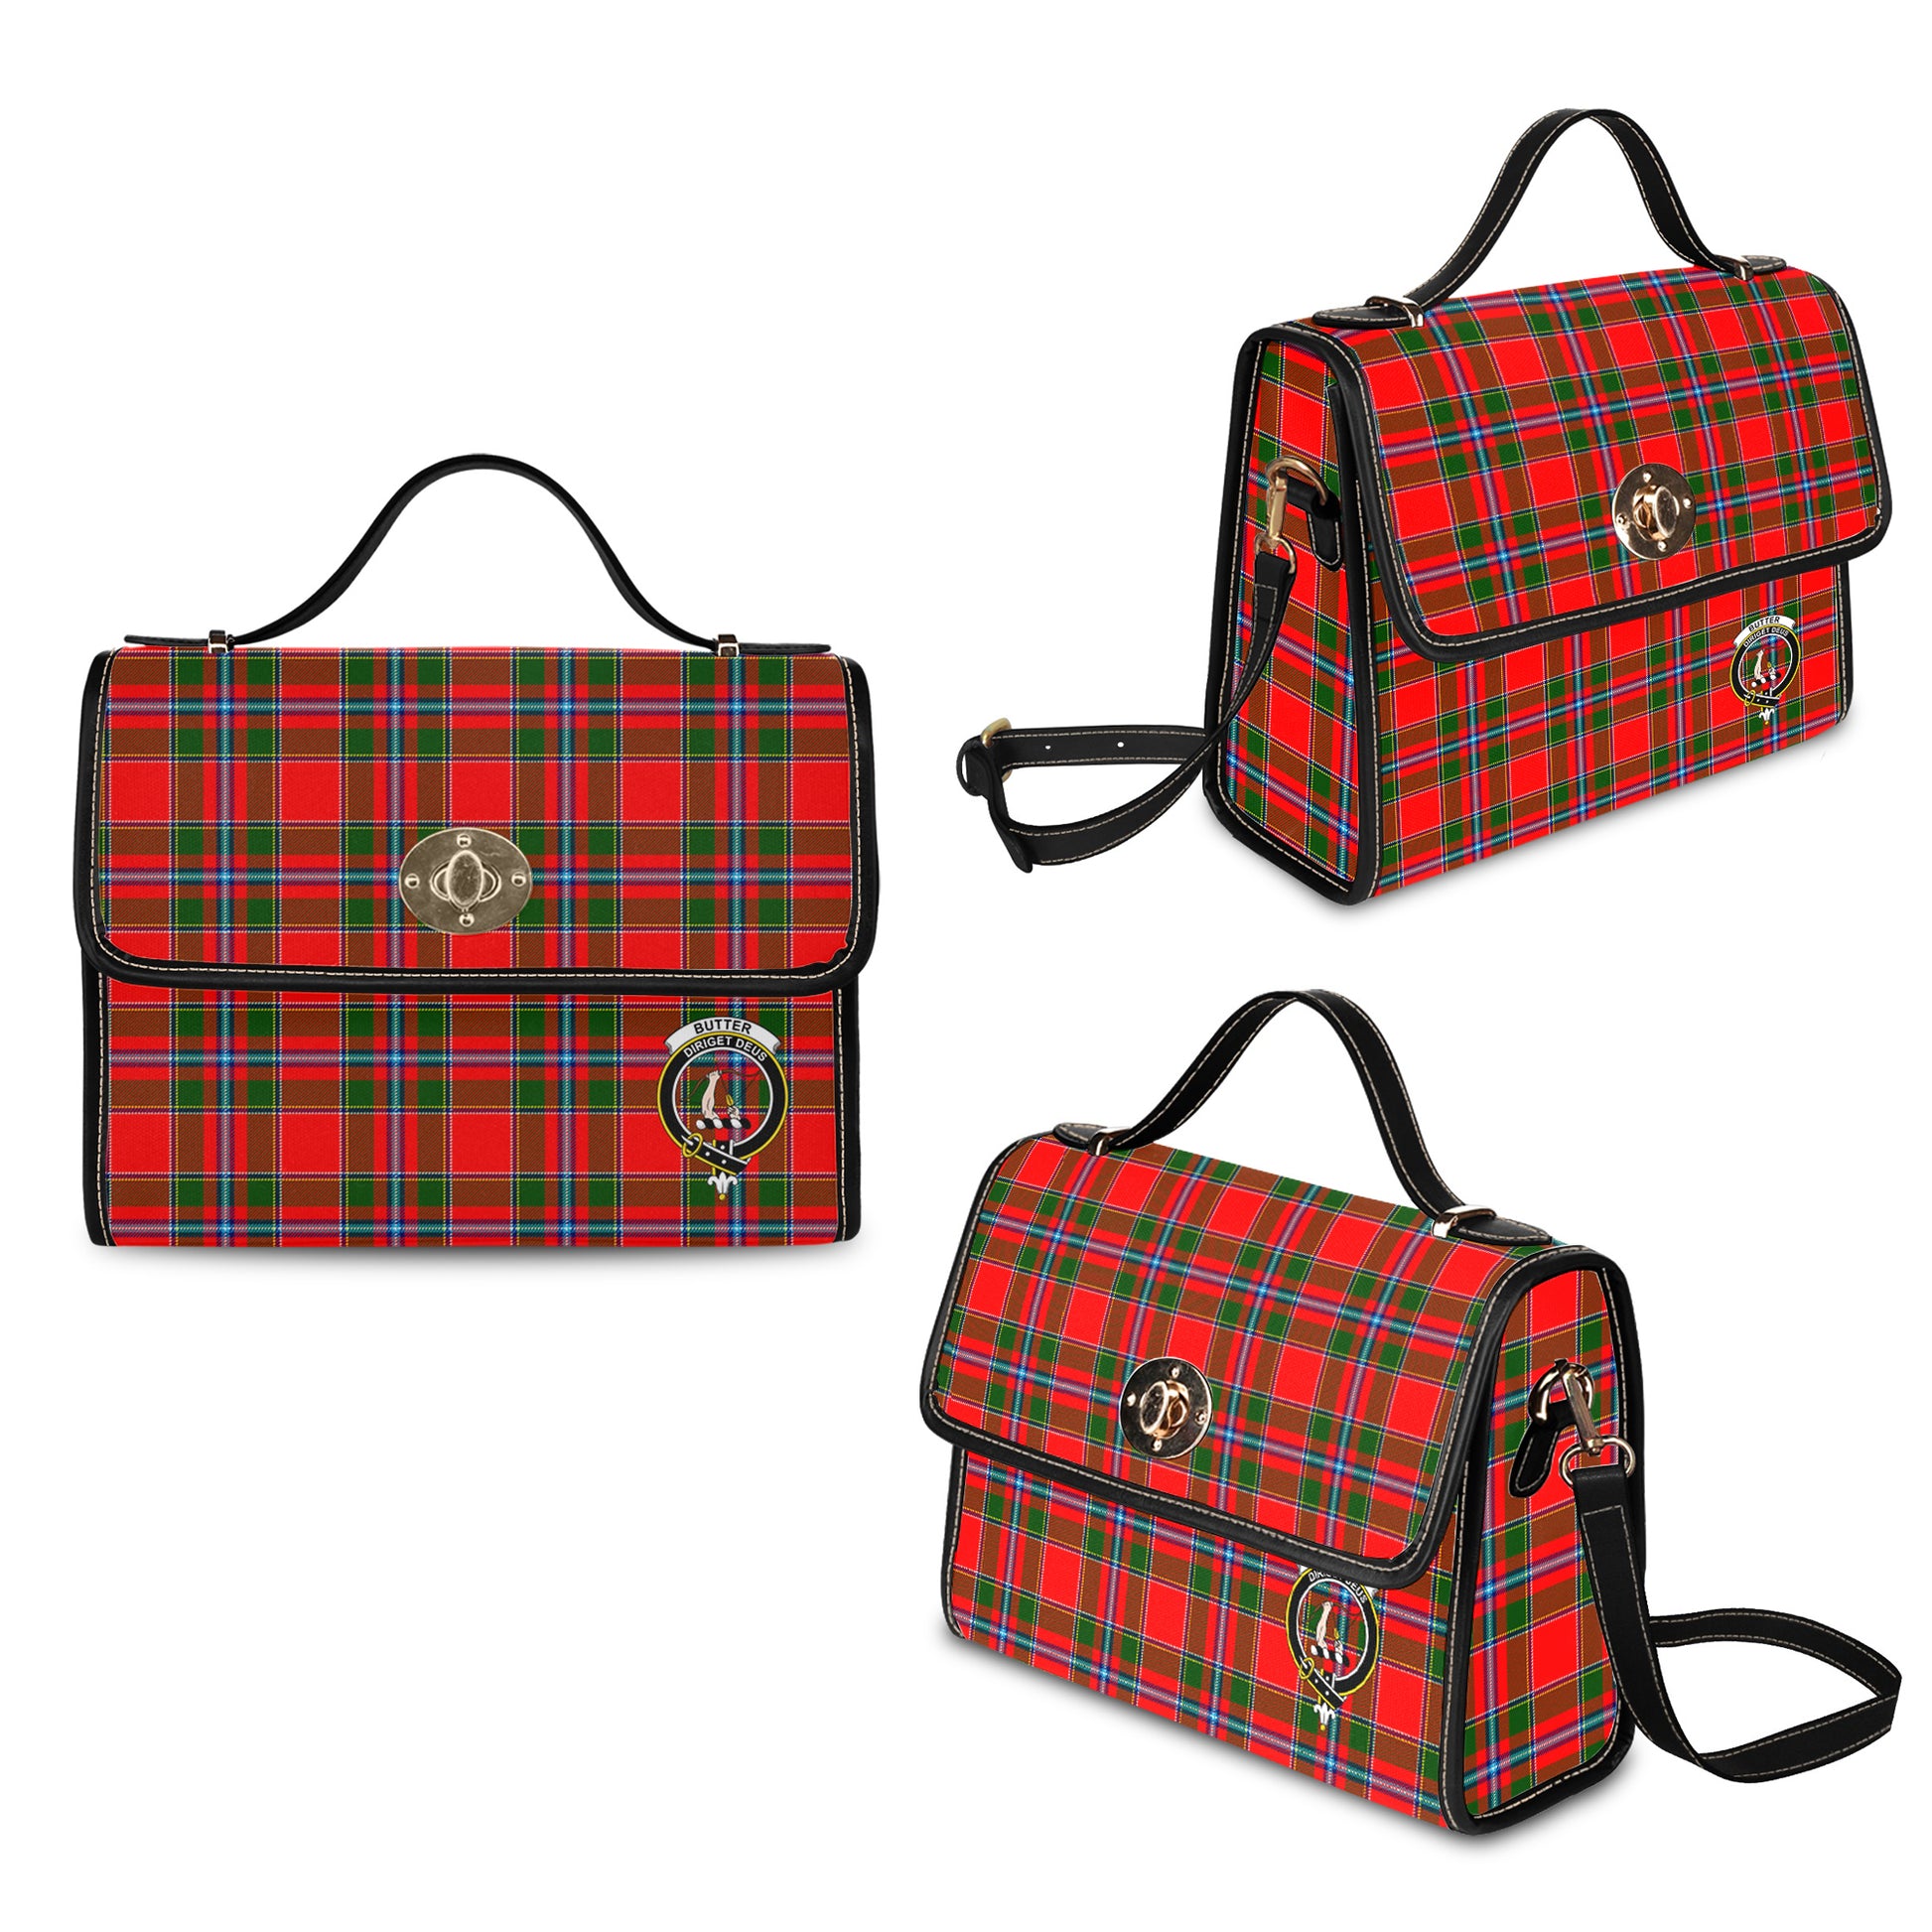 Butter Tartan Leather Strap Waterproof Canvas Bag with Family Crest